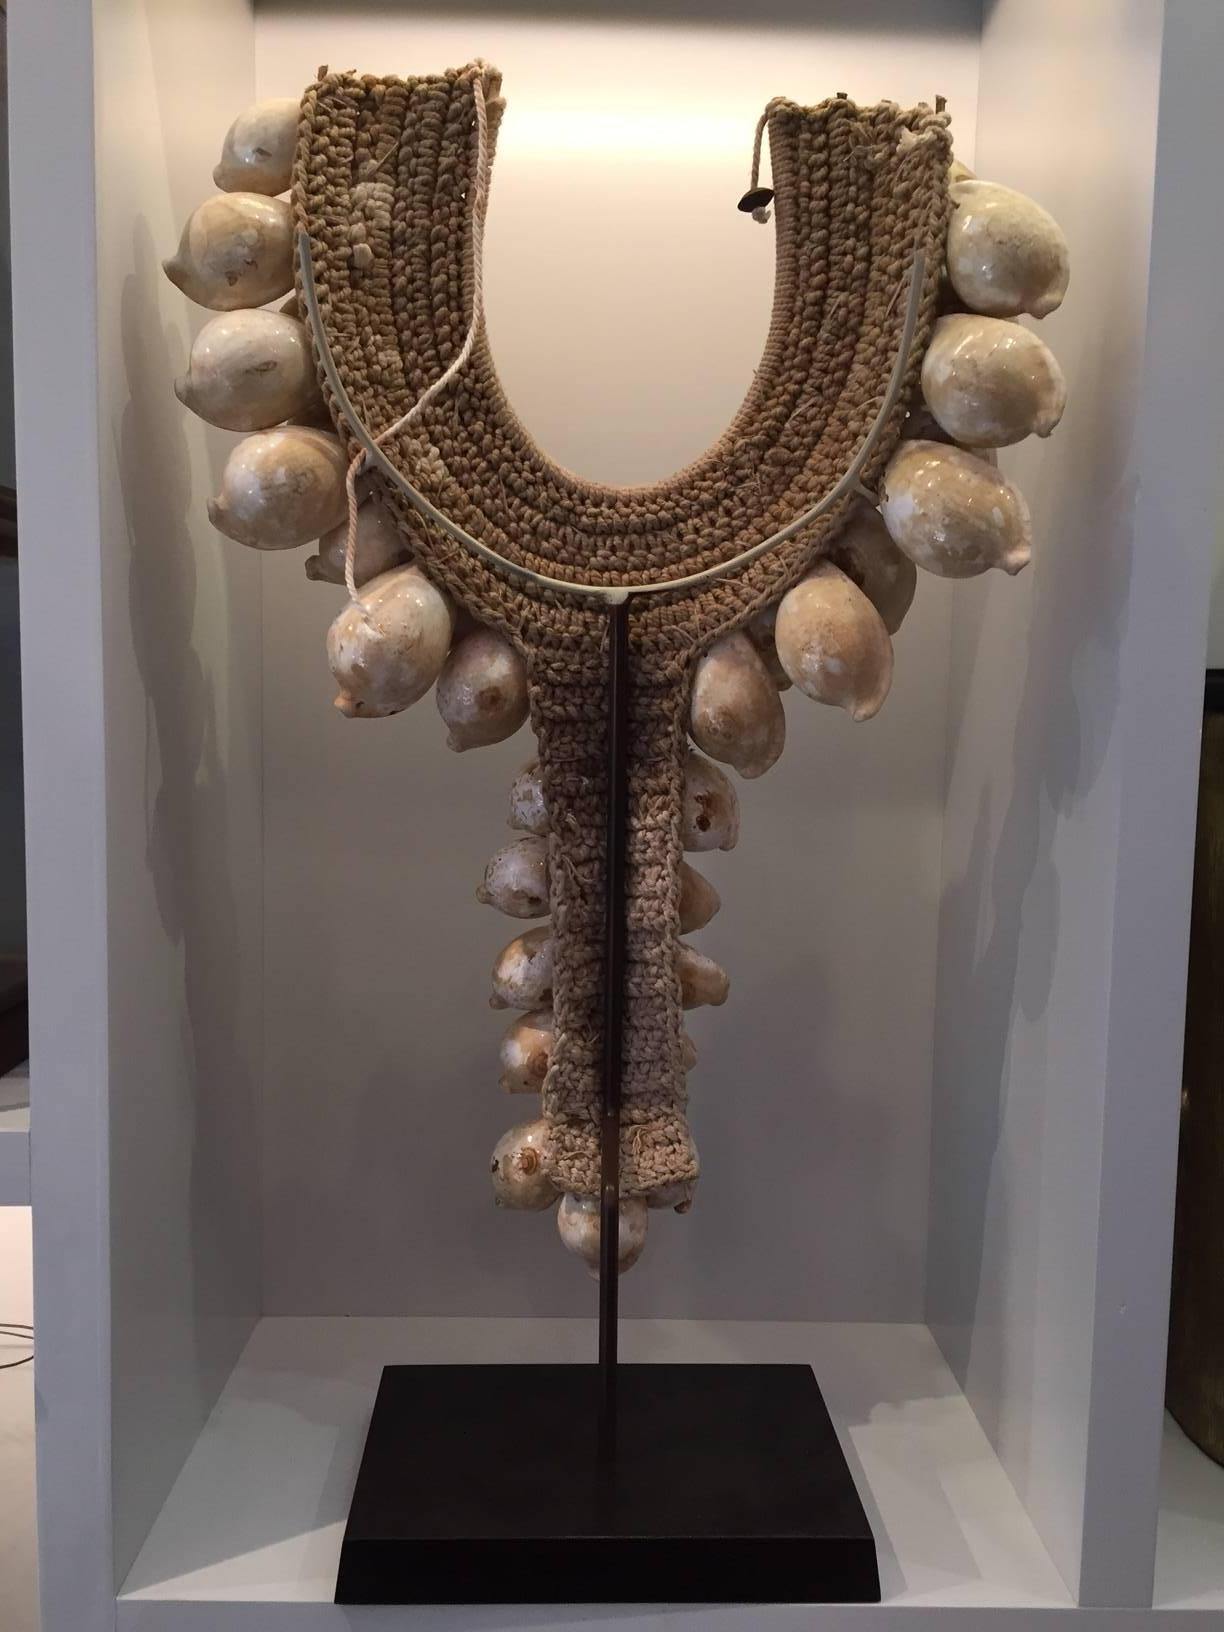 Indonesian Mounted Cowrie Shell Necklace from Papua New Guinea